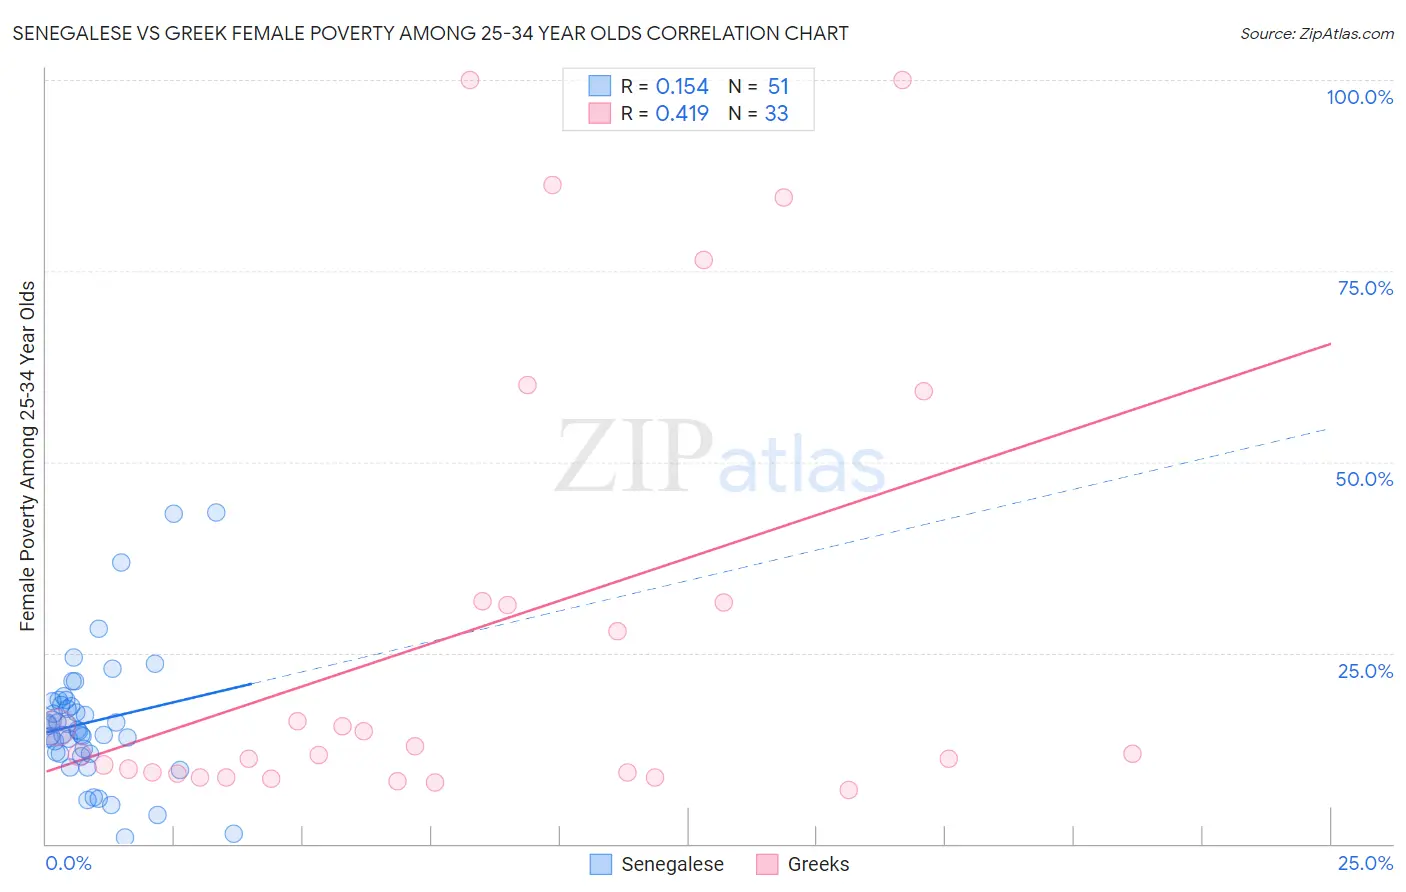 Senegalese vs Greek Female Poverty Among 25-34 Year Olds